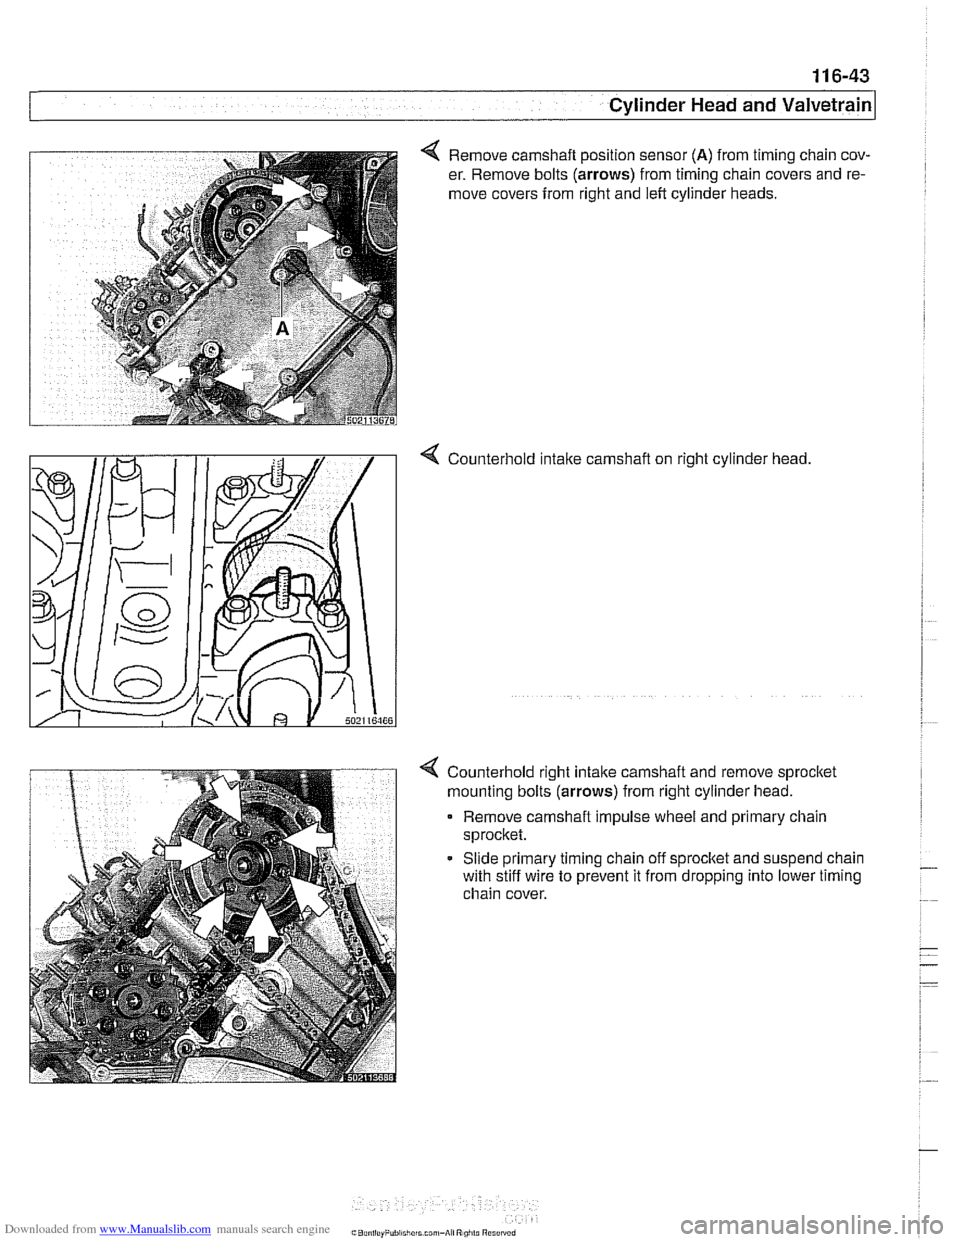 BMW 530i 2001 E39 Repair Manual Downloaded from www.Manualslib.com manuals search engine 
Cylinder Head and valvetrain1 
4 Remove camshaft position sensor (A) from timing chain cov- 
er.  Remove bolts 
(arrows) from timing chain cov